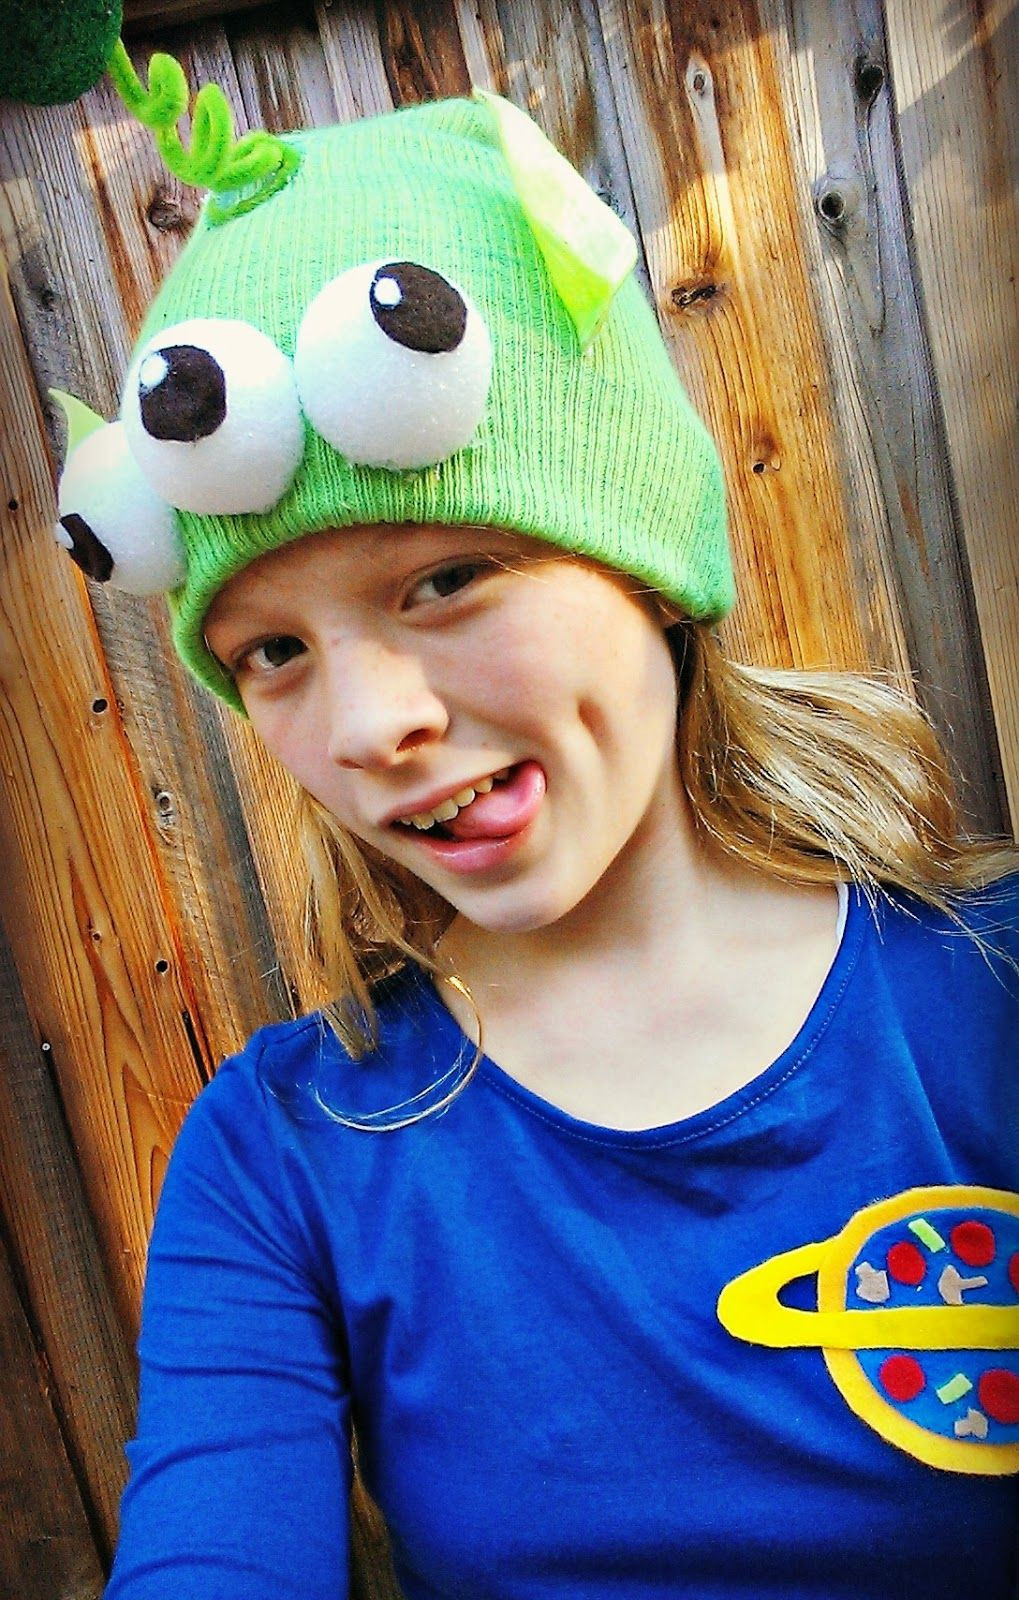 Toy Story Alien Costume DIY
 This year The Pea and her 2 BFFs decided they wanted to